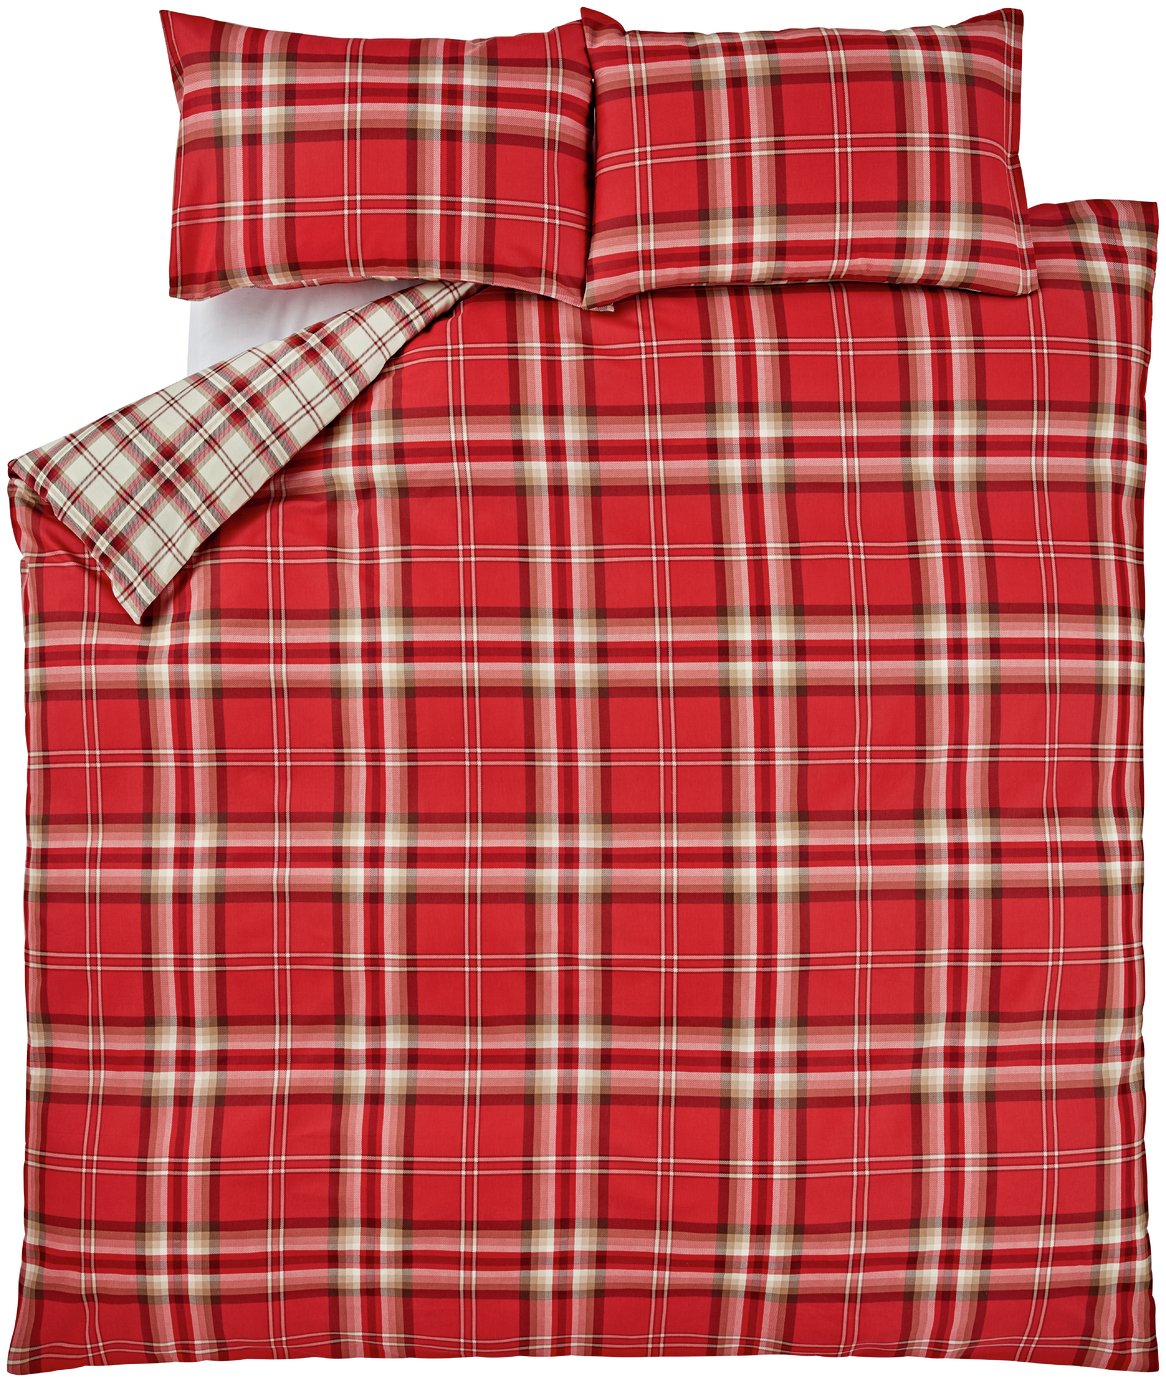 Catherine Lansfield Kelso Red Tartan Bedding Set - Double